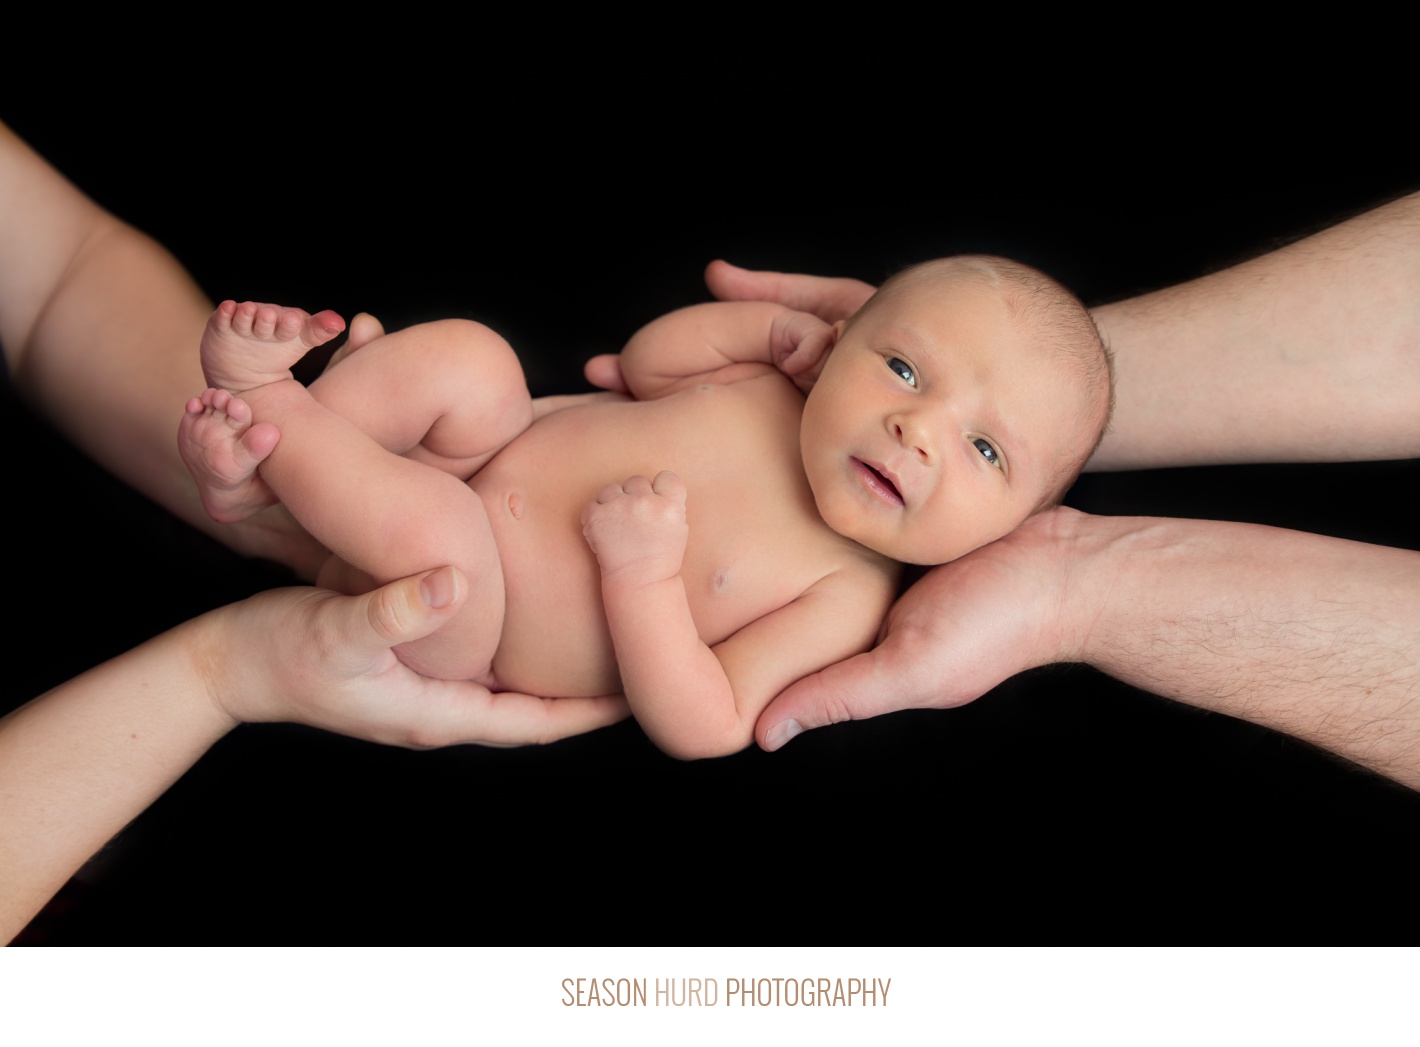 Artistic black backdrop shot of newborn being held by parents